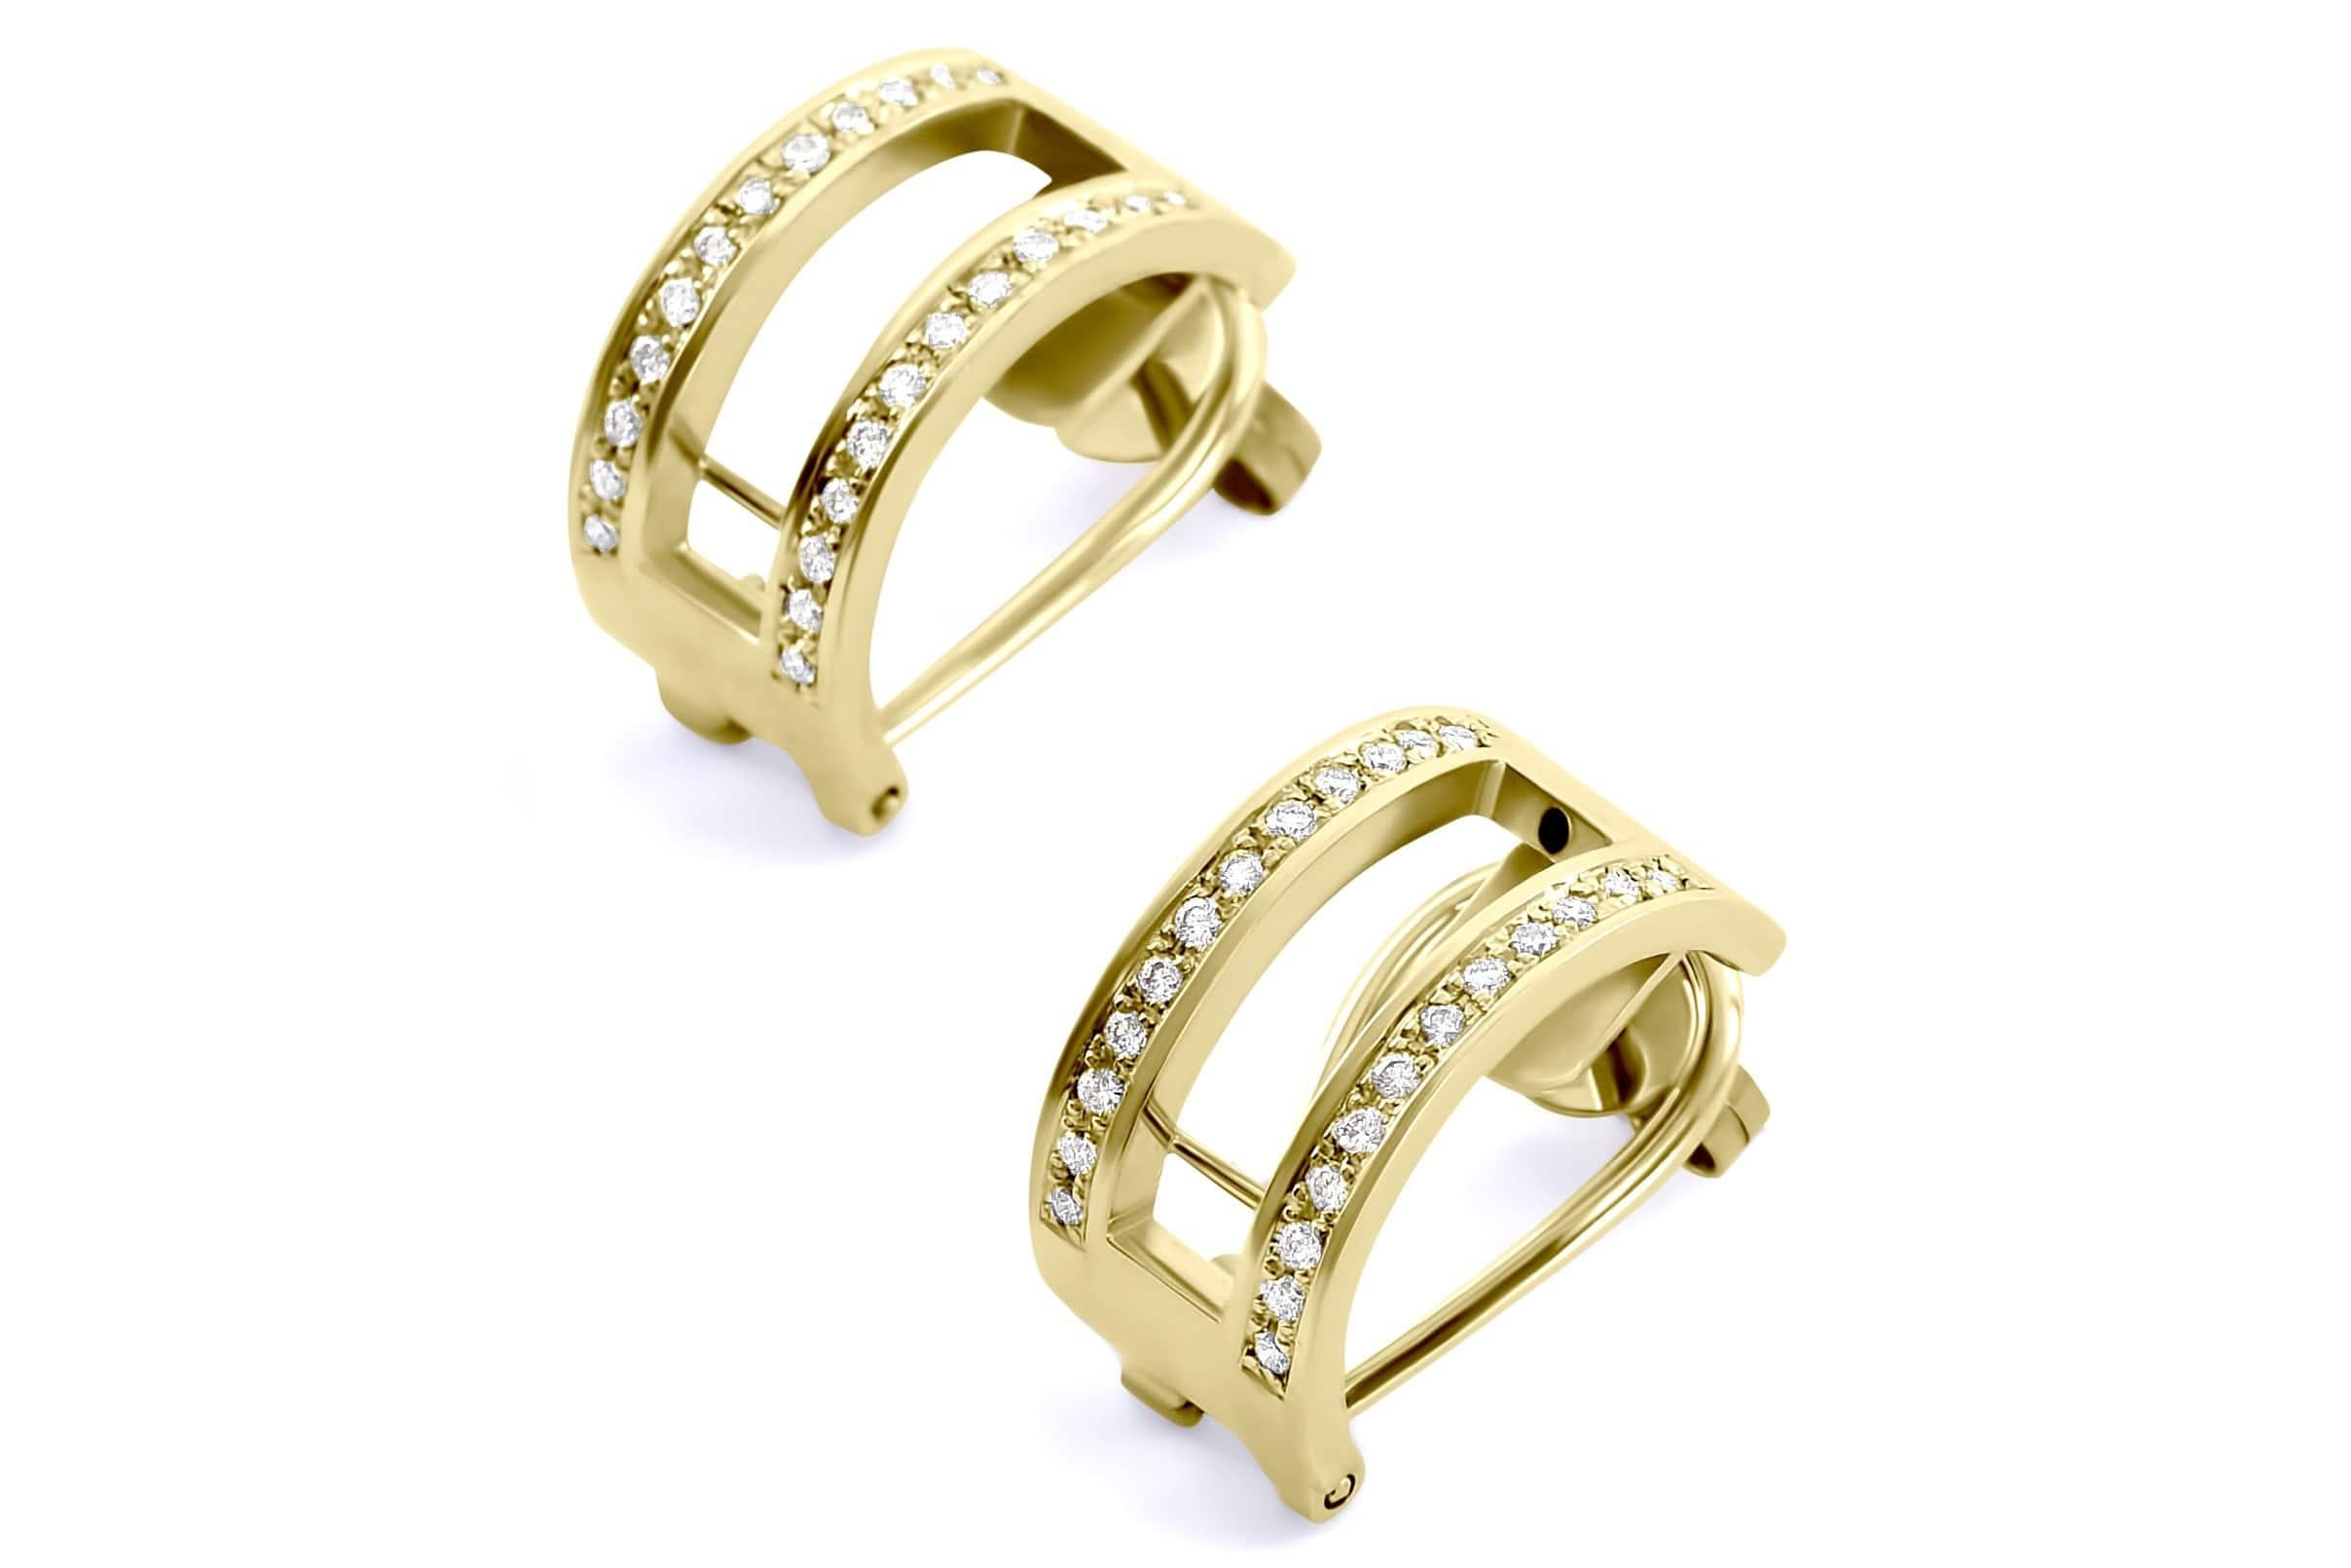 These exquisite hand crafted earrings feature two rows of the finest available brilliant cut diamonds, set in solid 18k yellow gold. Each insert boasts hand selected rubies, tsavorites and sapphires in a calibrated setting. The ingenious design